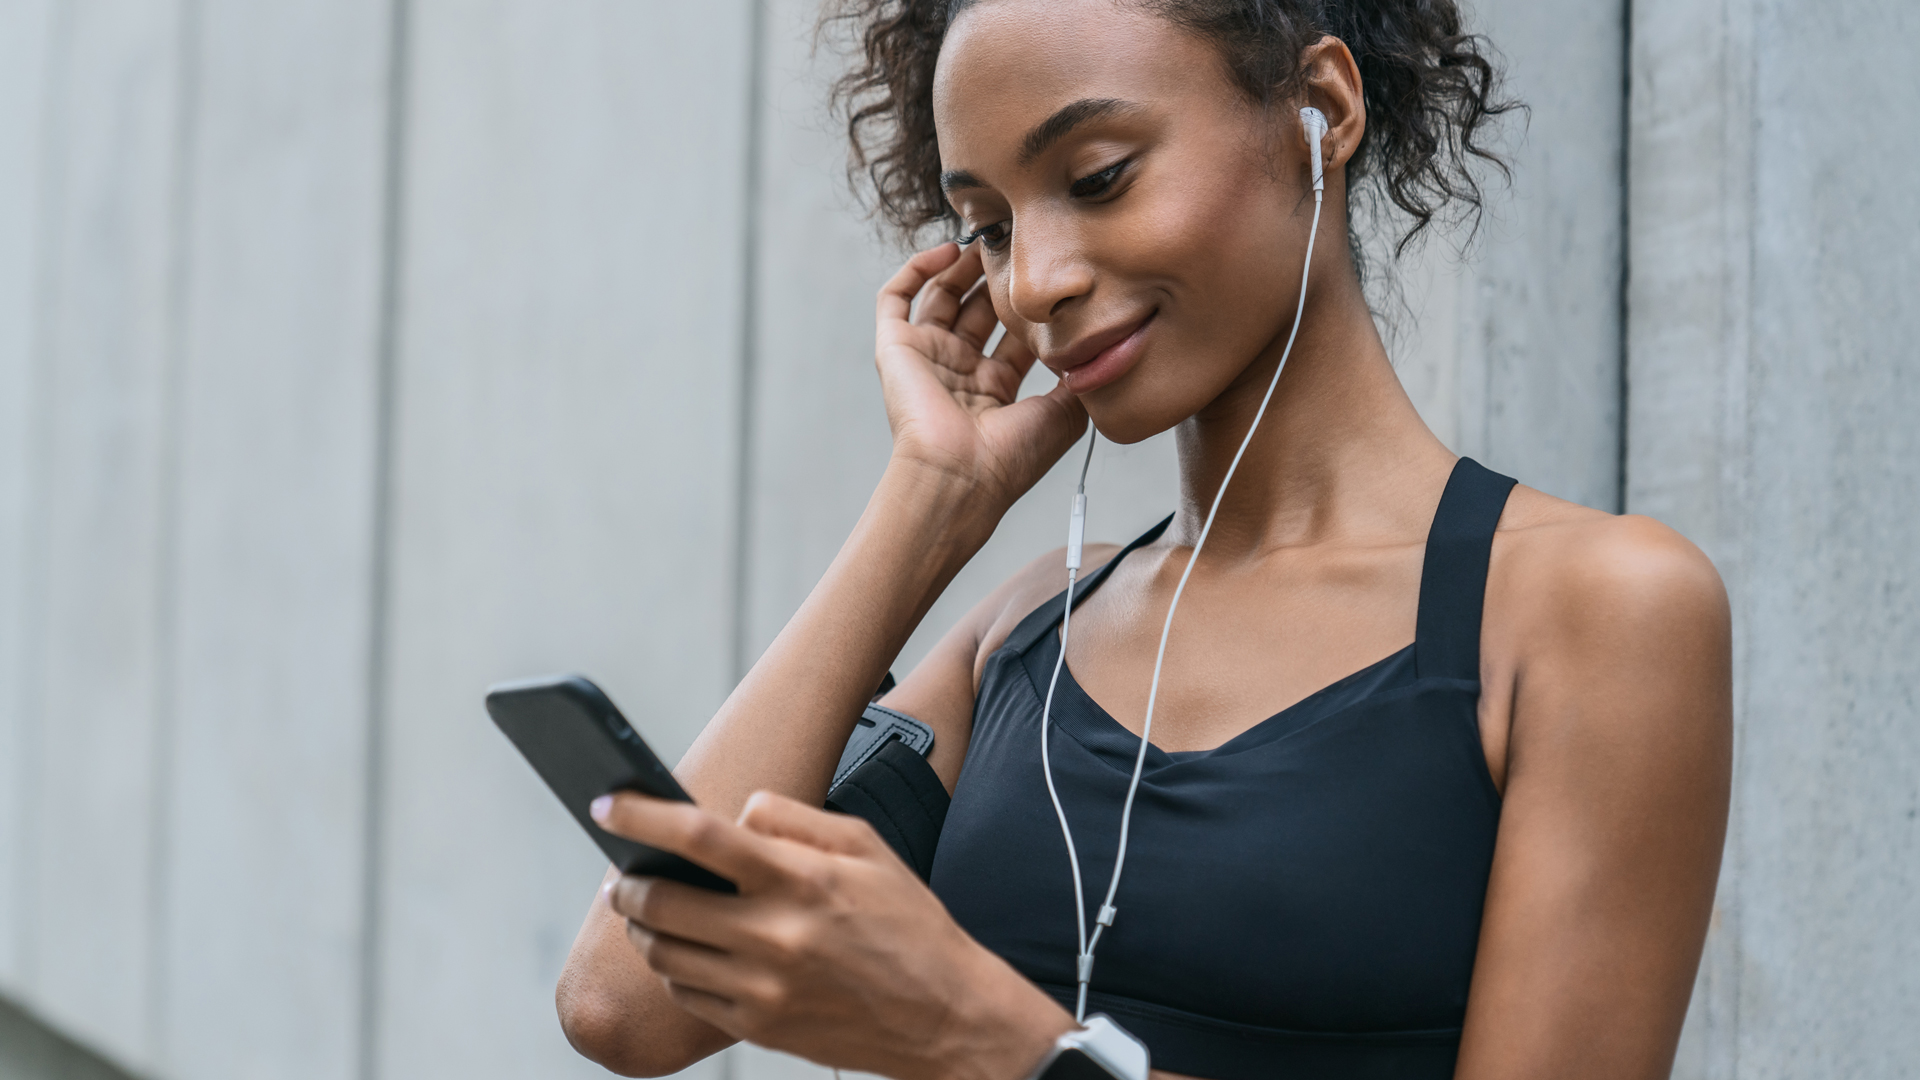 Health and fitness podcasts featuring BIPOC | The GoodLife Fitness Blog